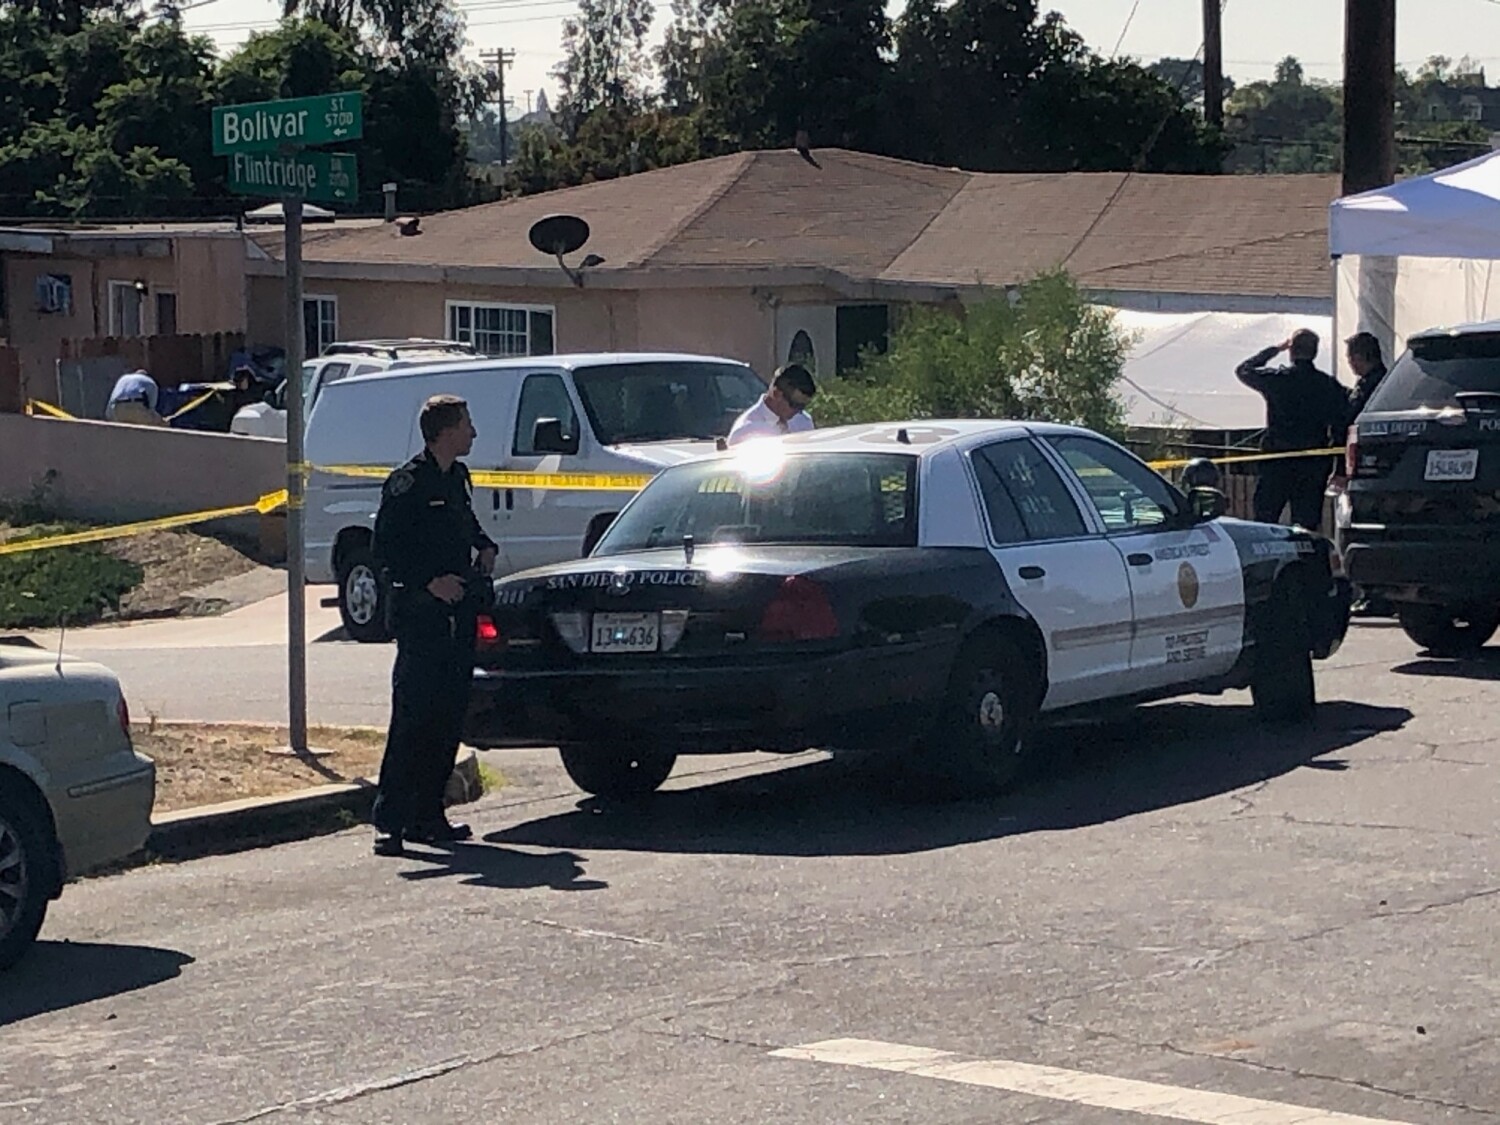 5 dead, including 3 children, in domestic violence murder-suicide in Paradise Hills